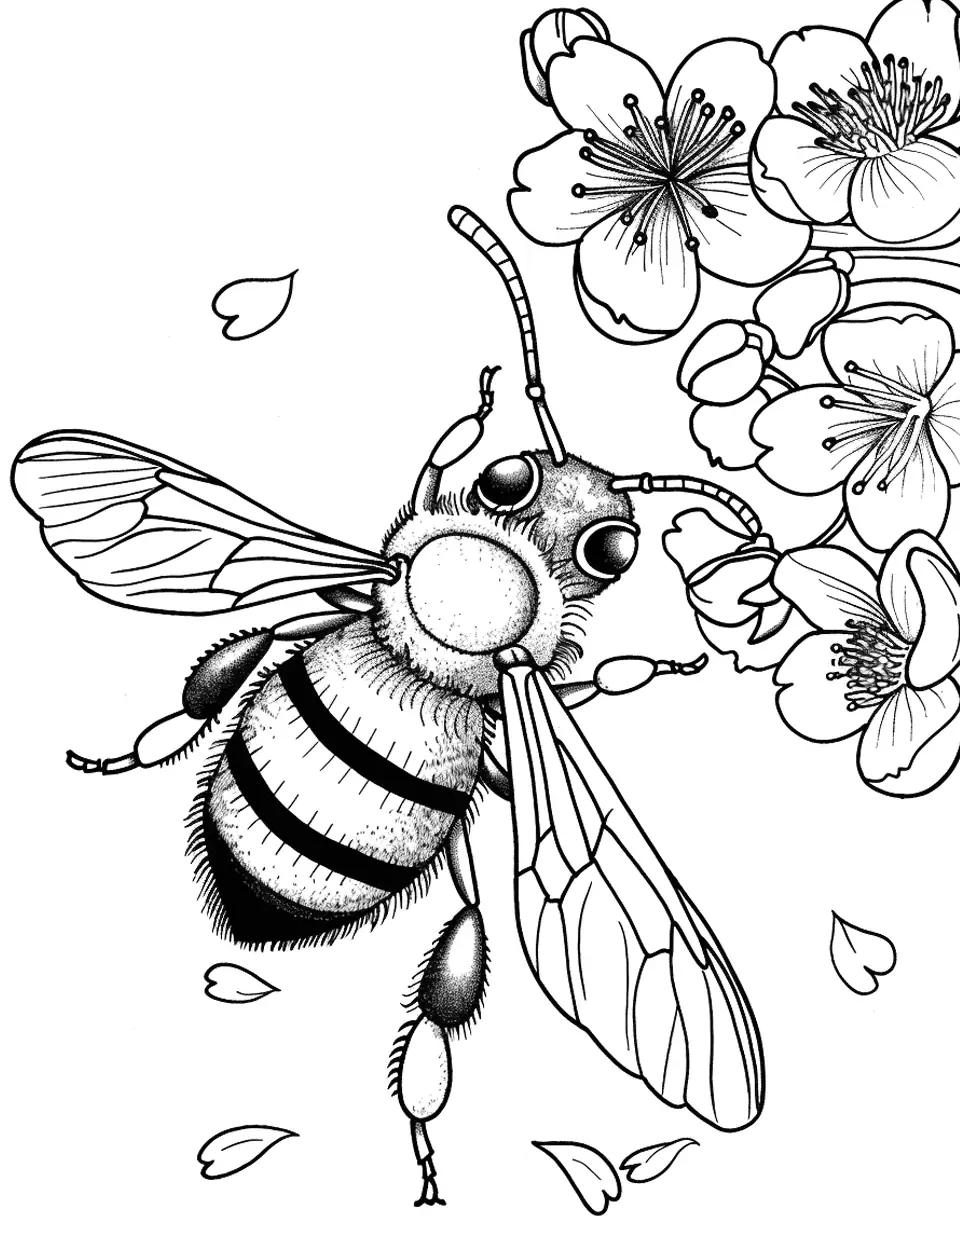 Bee on a Cherry Blossom Coloring Page - A bee visiting a cherry blossom, with soft petals surrounding it.